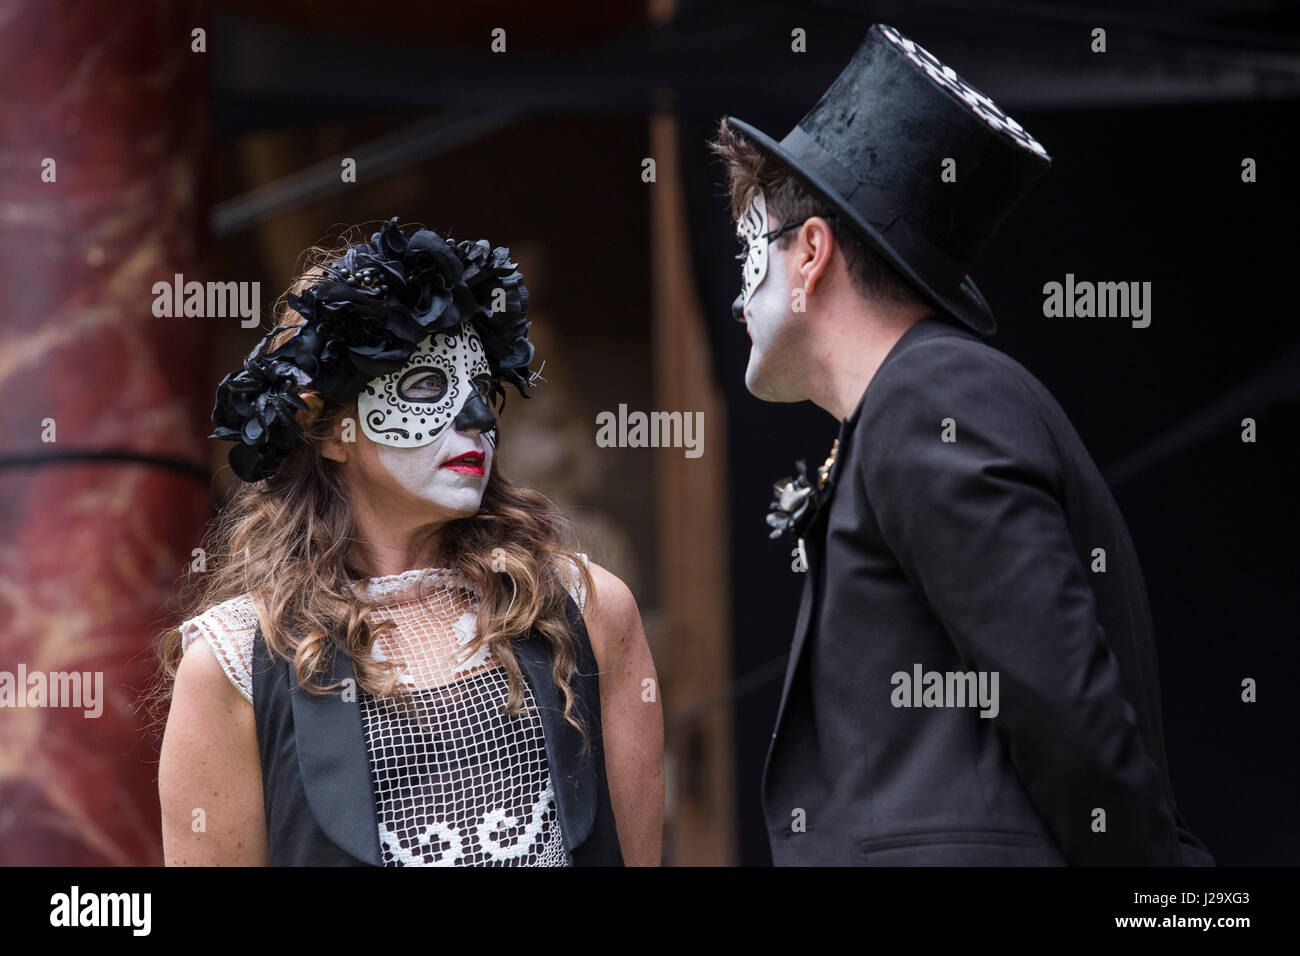 London, UK. 26 April 2017. Kirsty Bushell (Juliet), Edward Hogg (Romeo). Photocall for the Shakespearen tragedy Romeo and Juliet at the Globe Theatre. The play is directed by Daniel Kramer starring Kirsty Bushell as Julia and Edward Hogg as Romeo. It runs from 22 April to 9 July 2017. Stock Photo